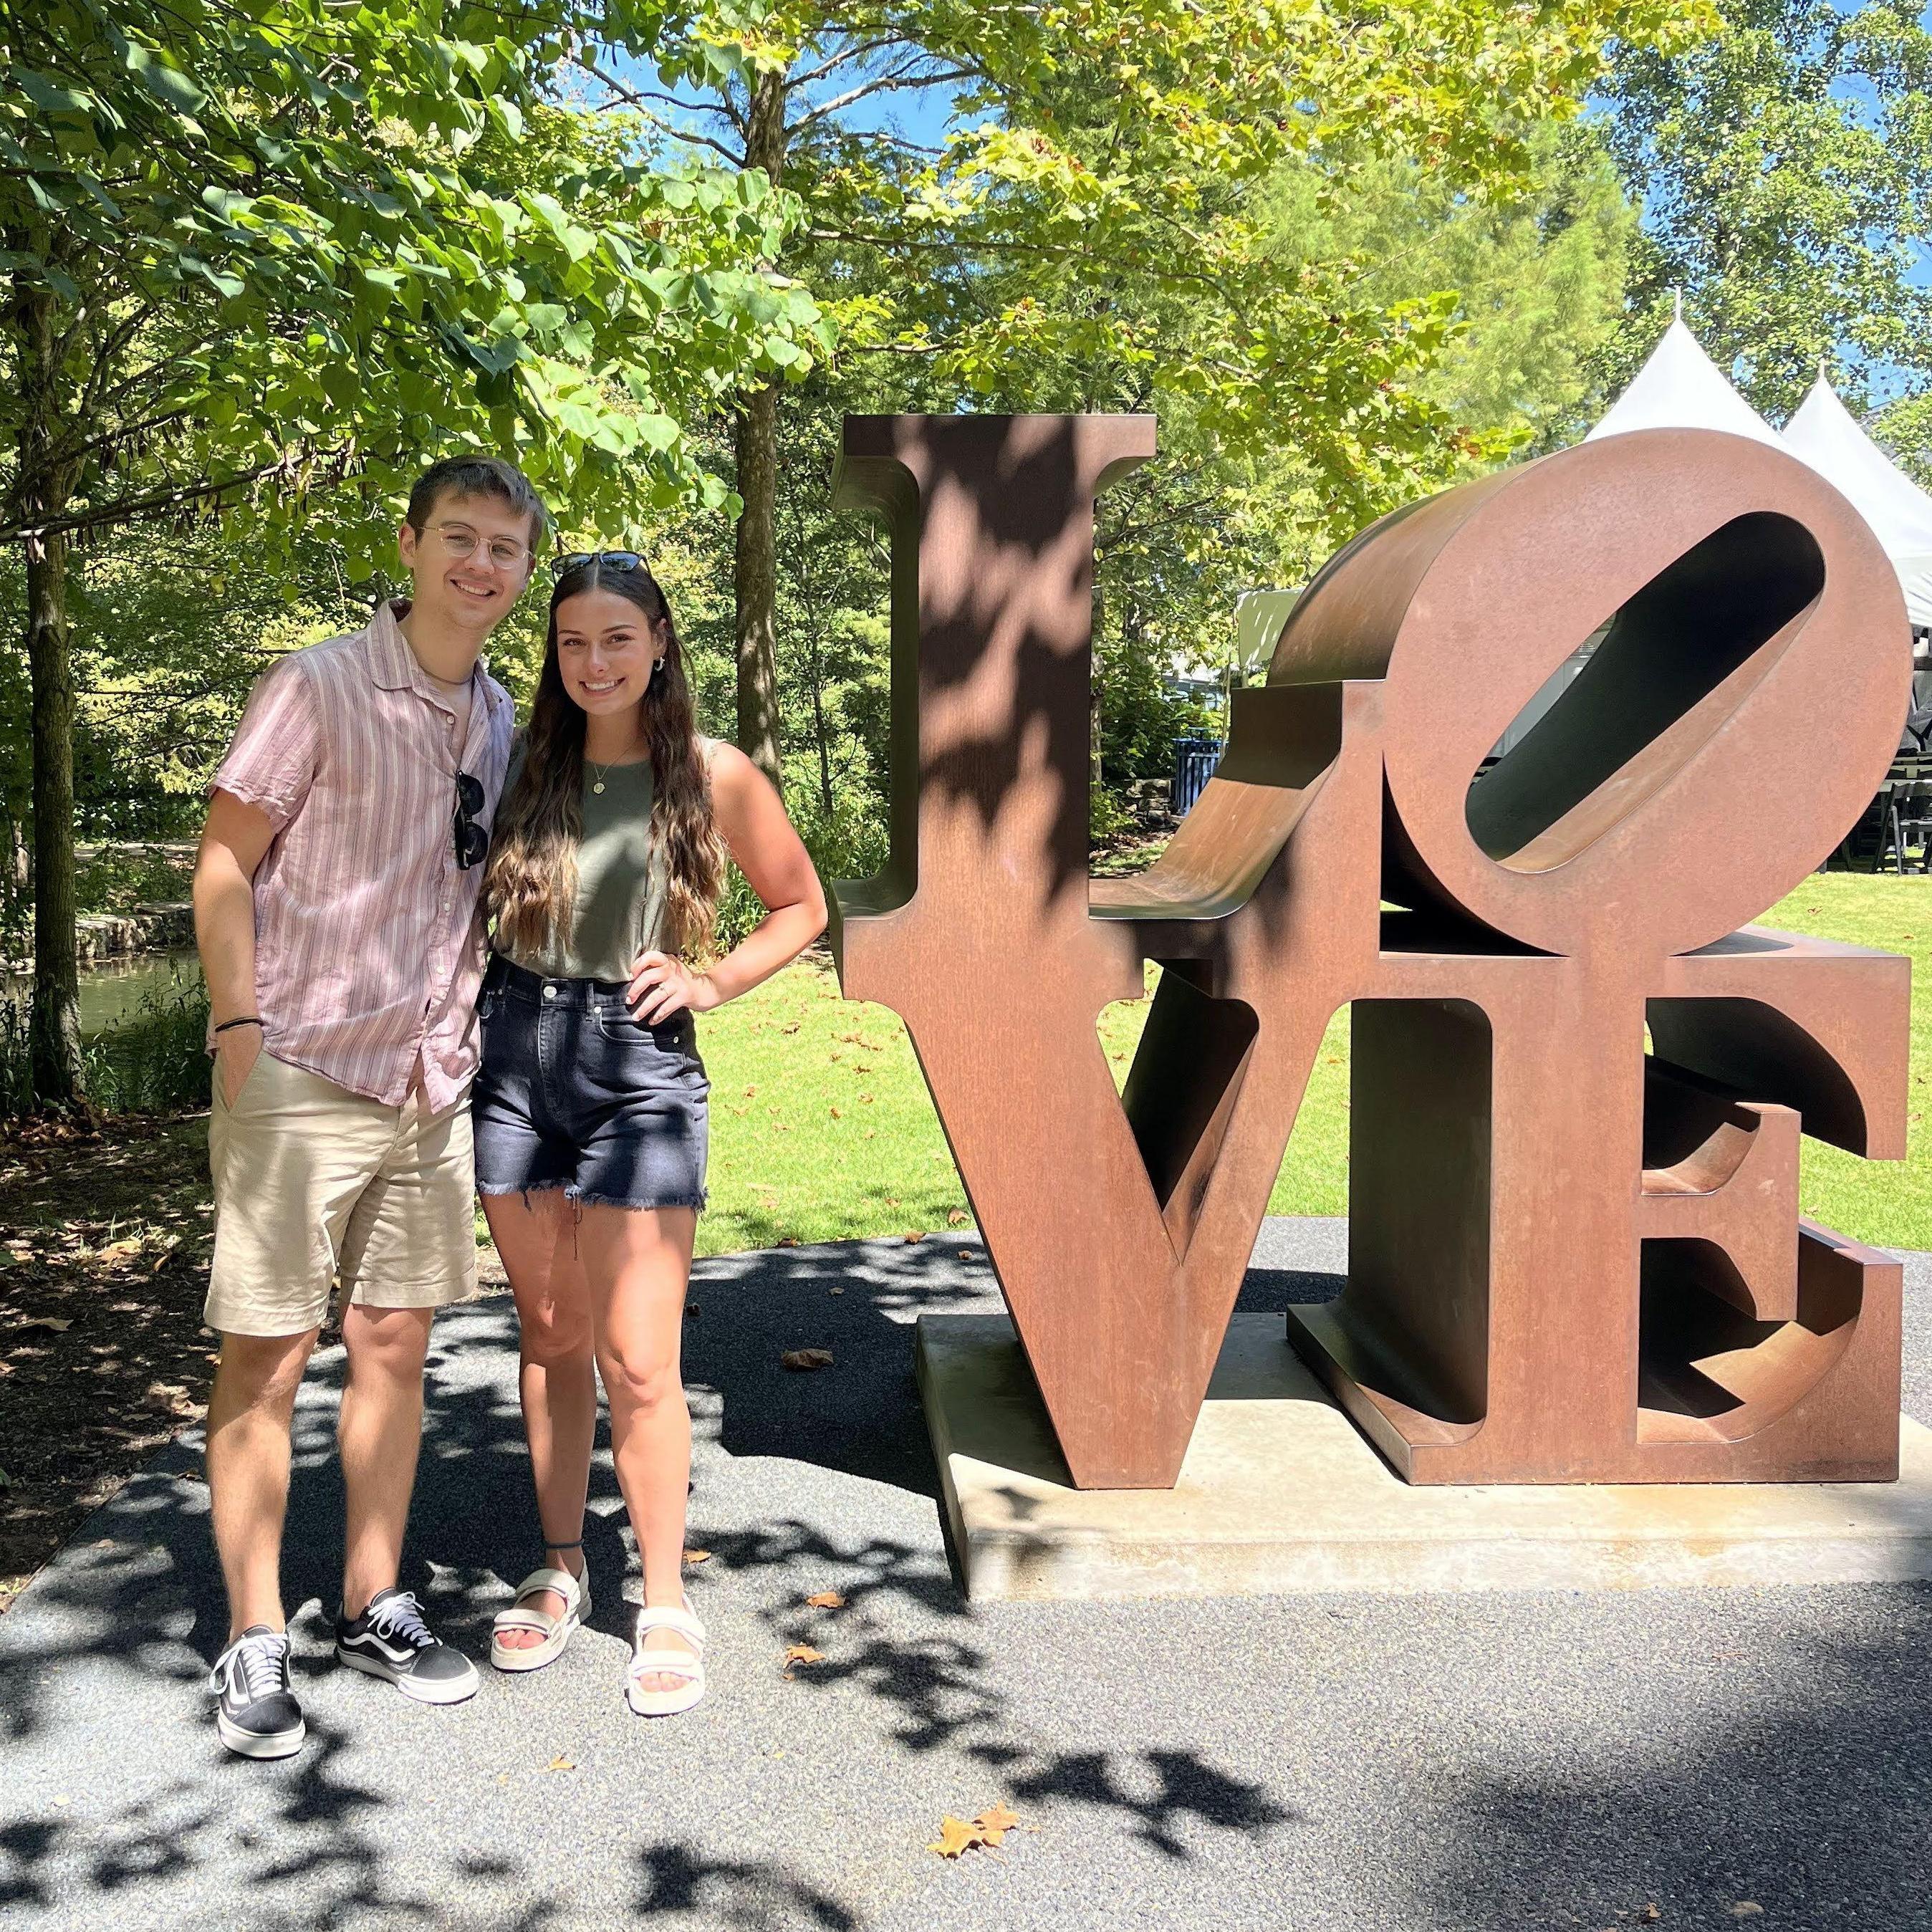 Our trip to Bentonville, AR to visit another LOVE sculpture